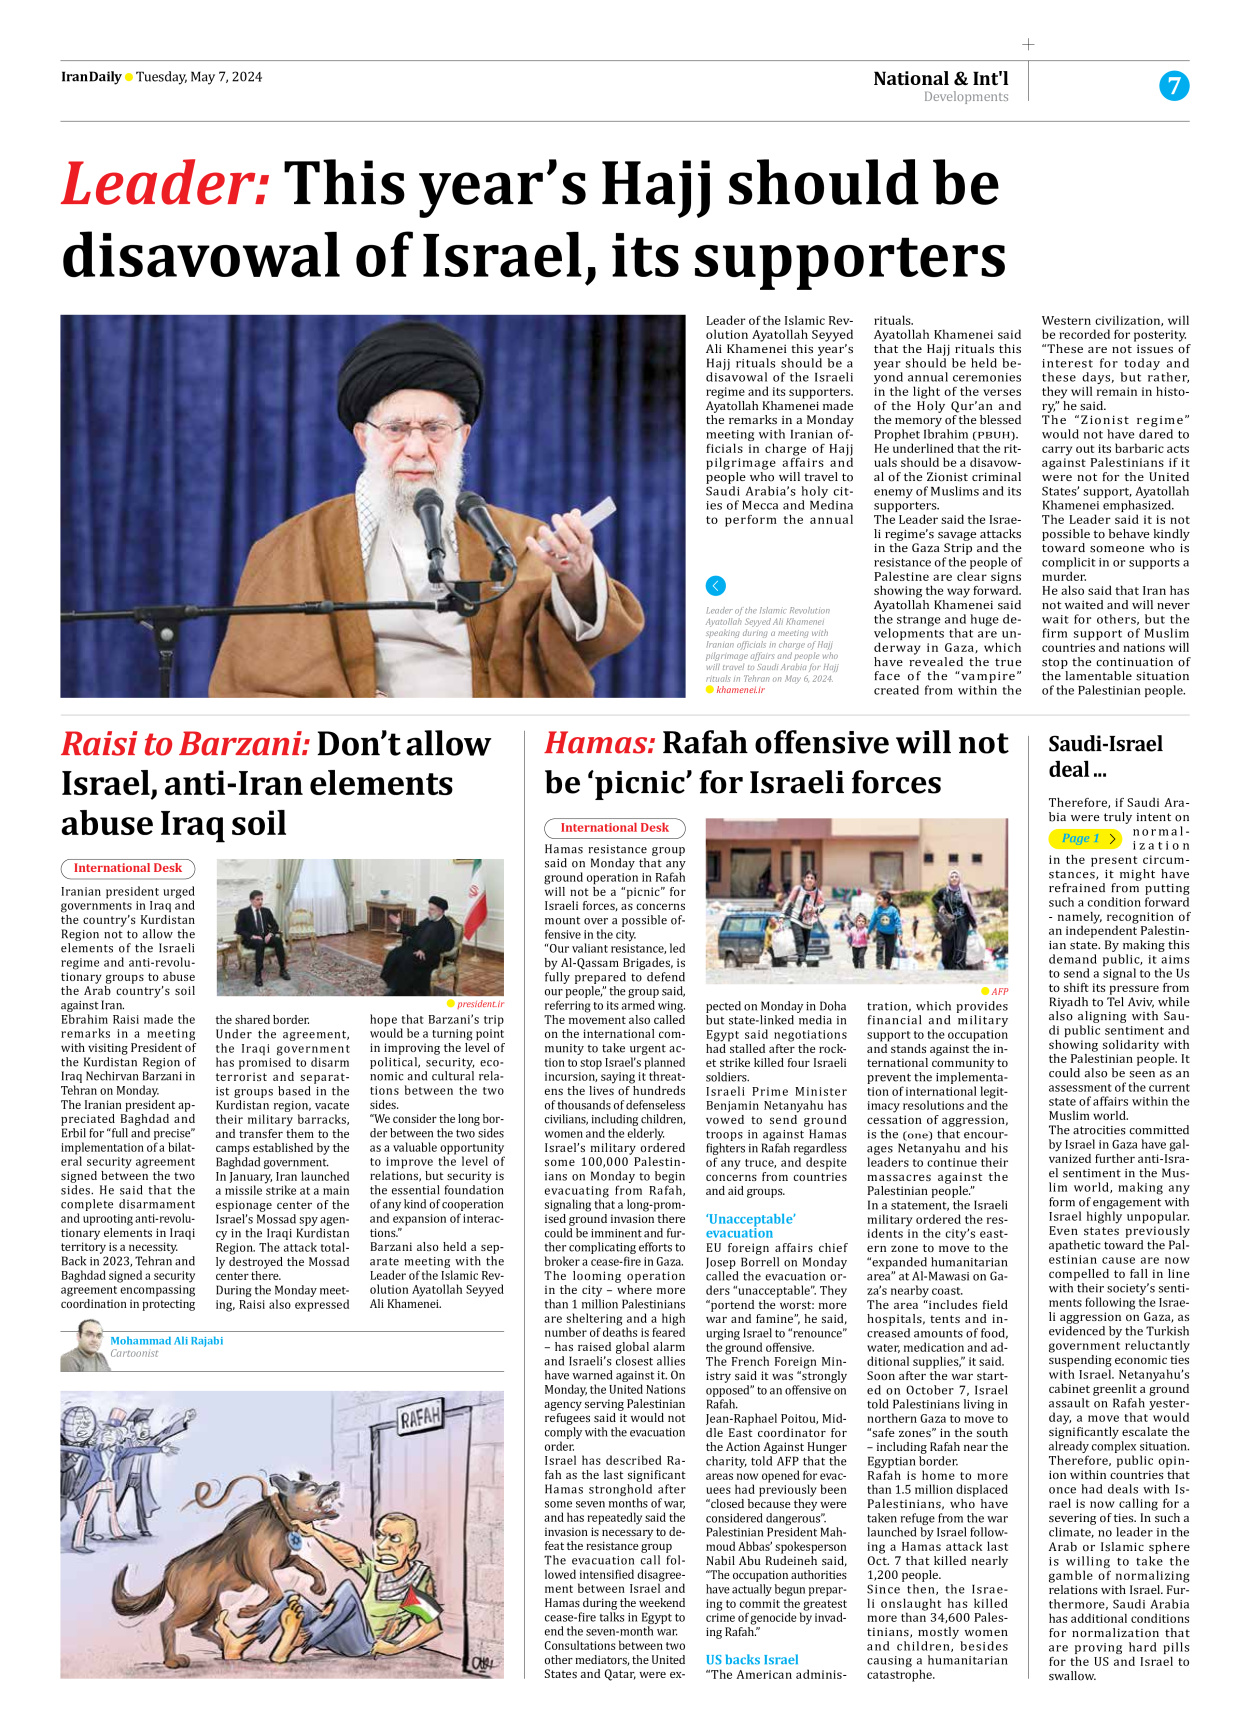 Iran Daily - Number Seven Thousand Five Hundred and Fifty One - 07 May 2024 - Page 7